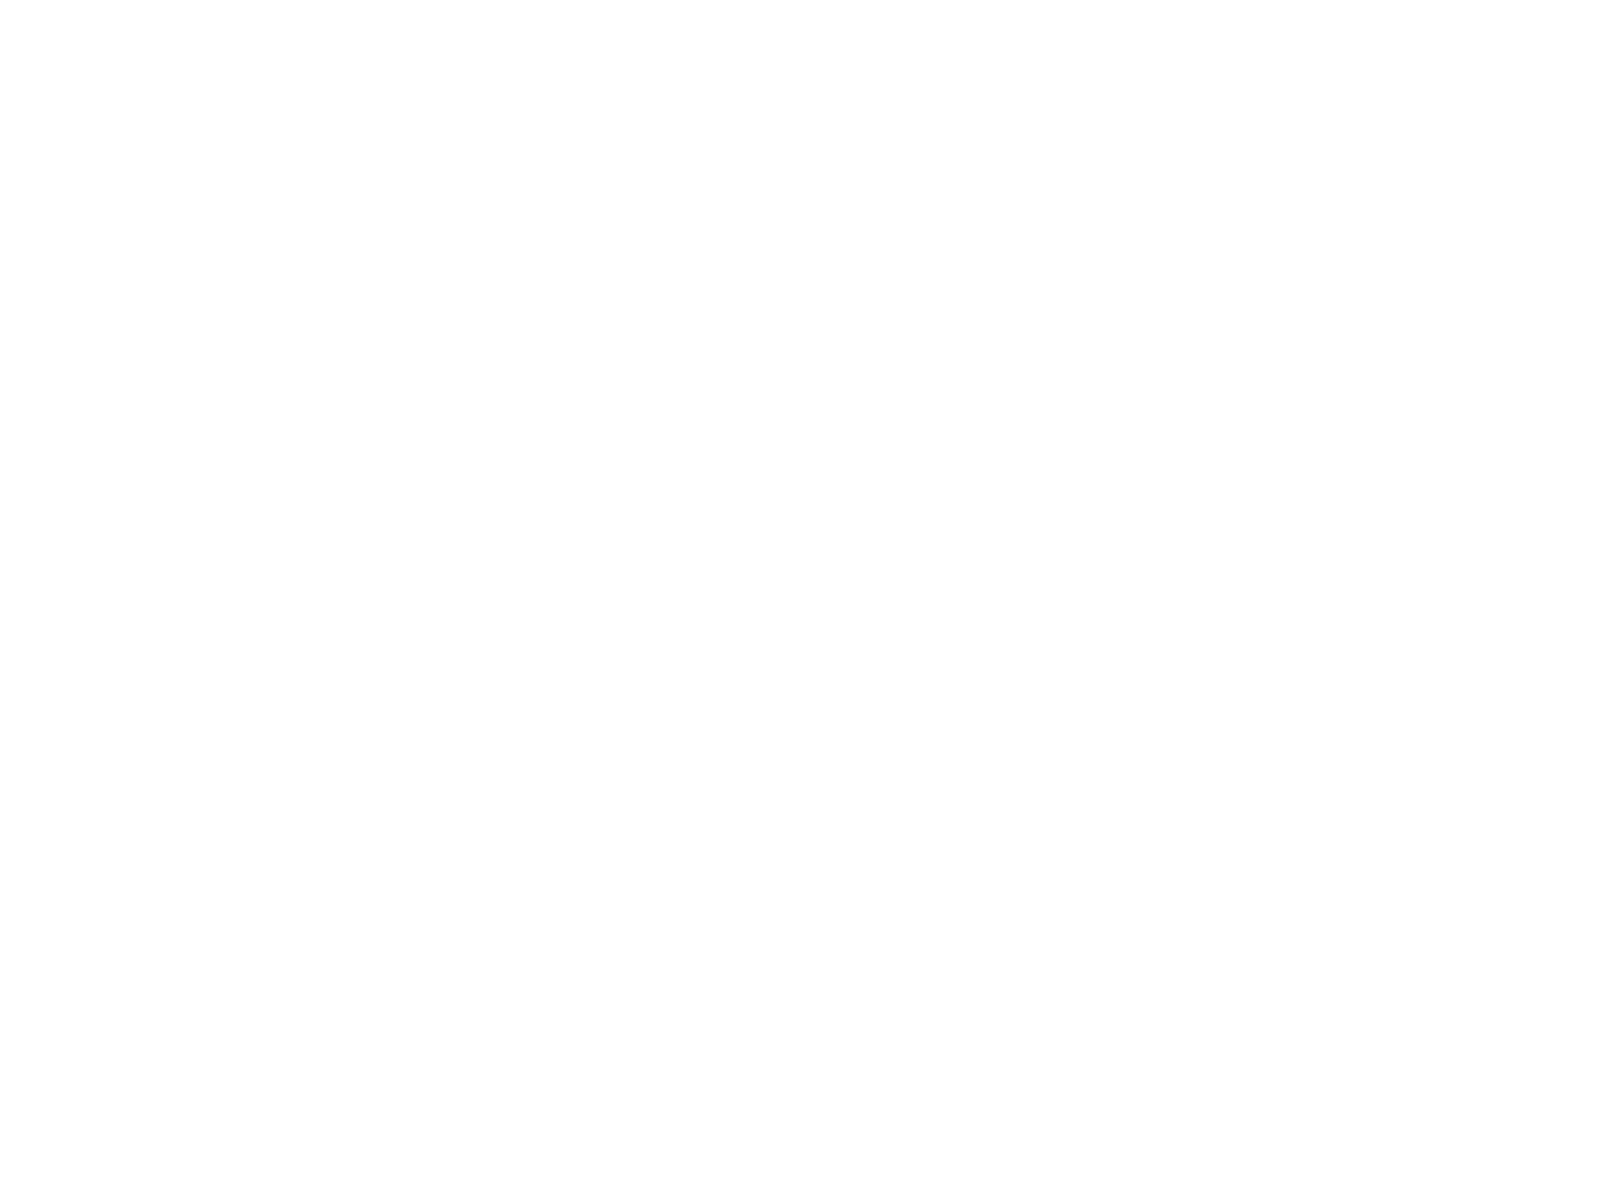 25% Off Recovery, CODE: RECOVER25